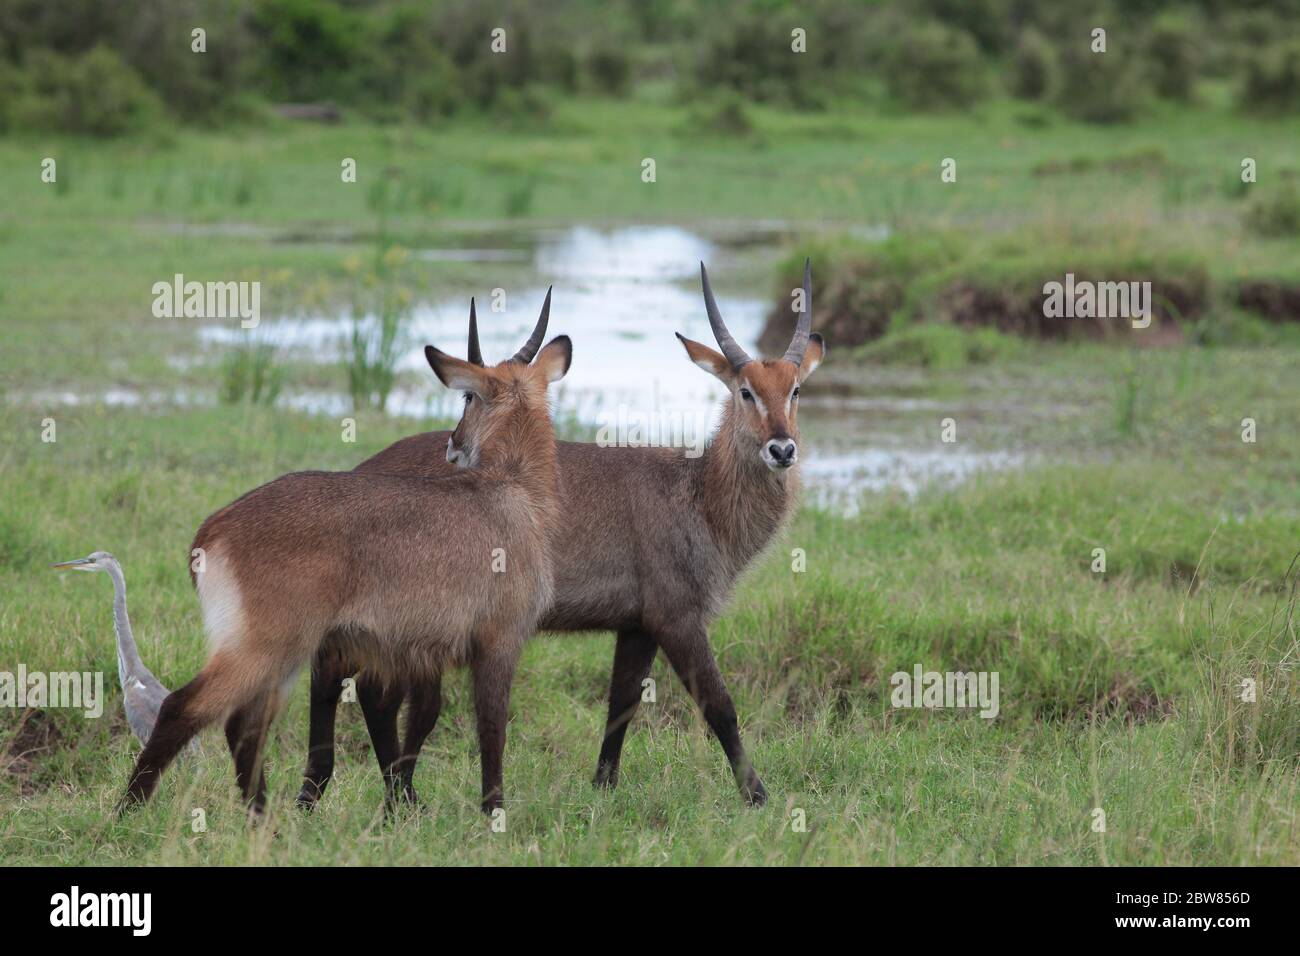 Two Waterbucks in the green Kenyan savannah. The landscape was flooded after heavy downpours. There is a gray heron right next to them. Stock Photo